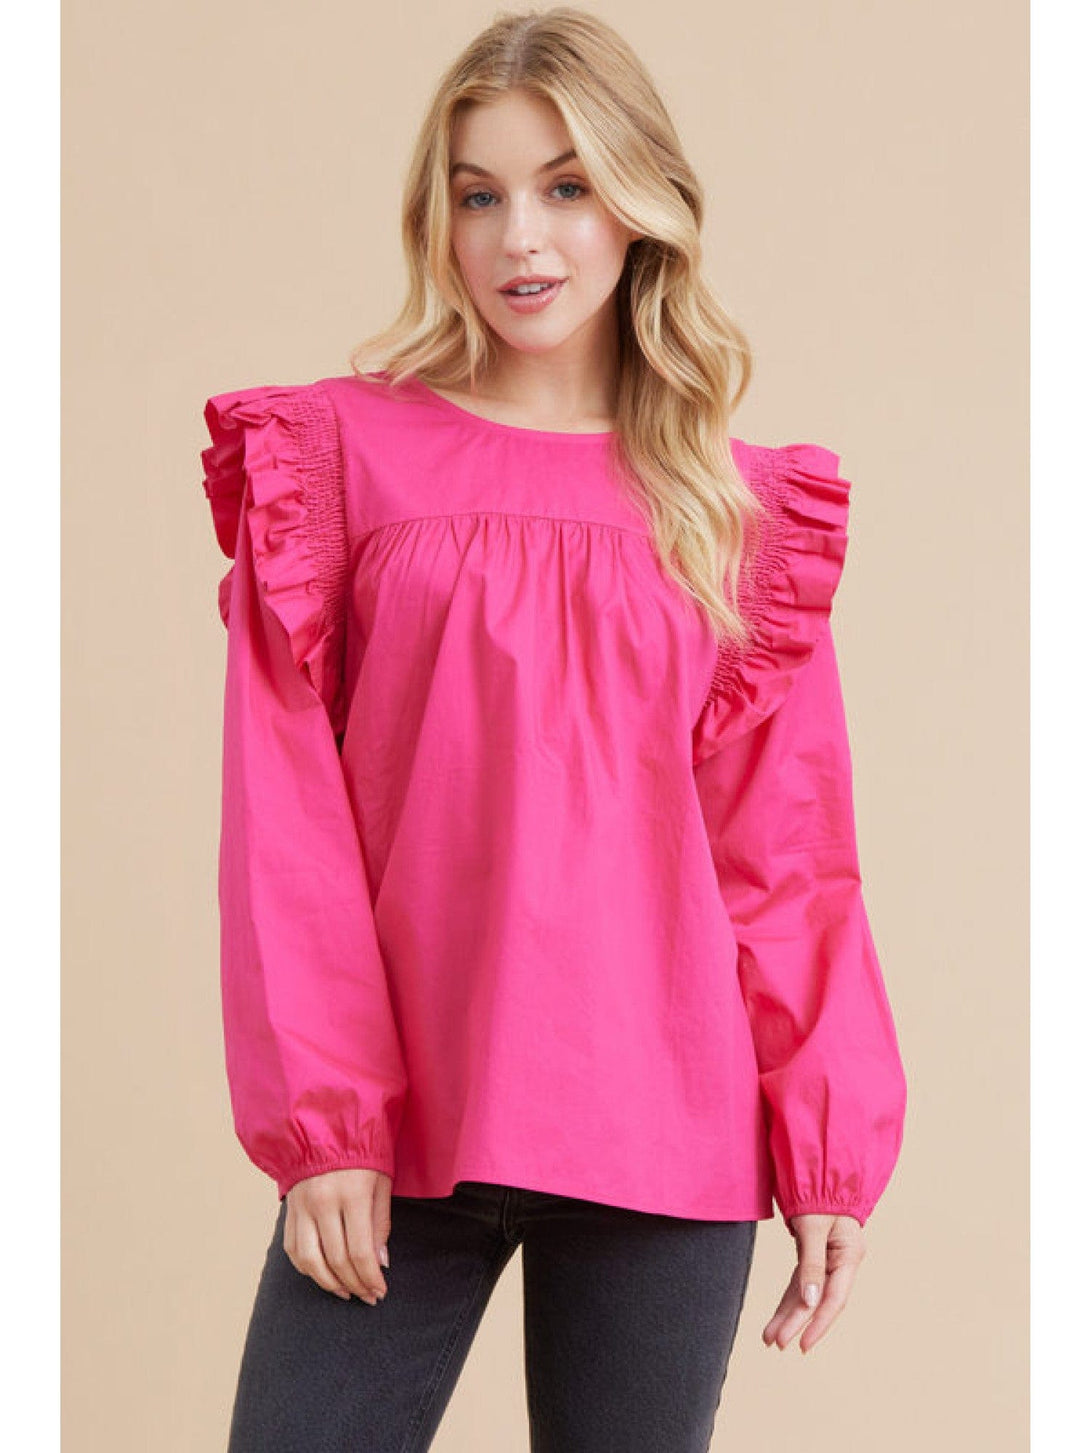 Jodifl Solid Top with U-Neck and Long Bubble Sleeves